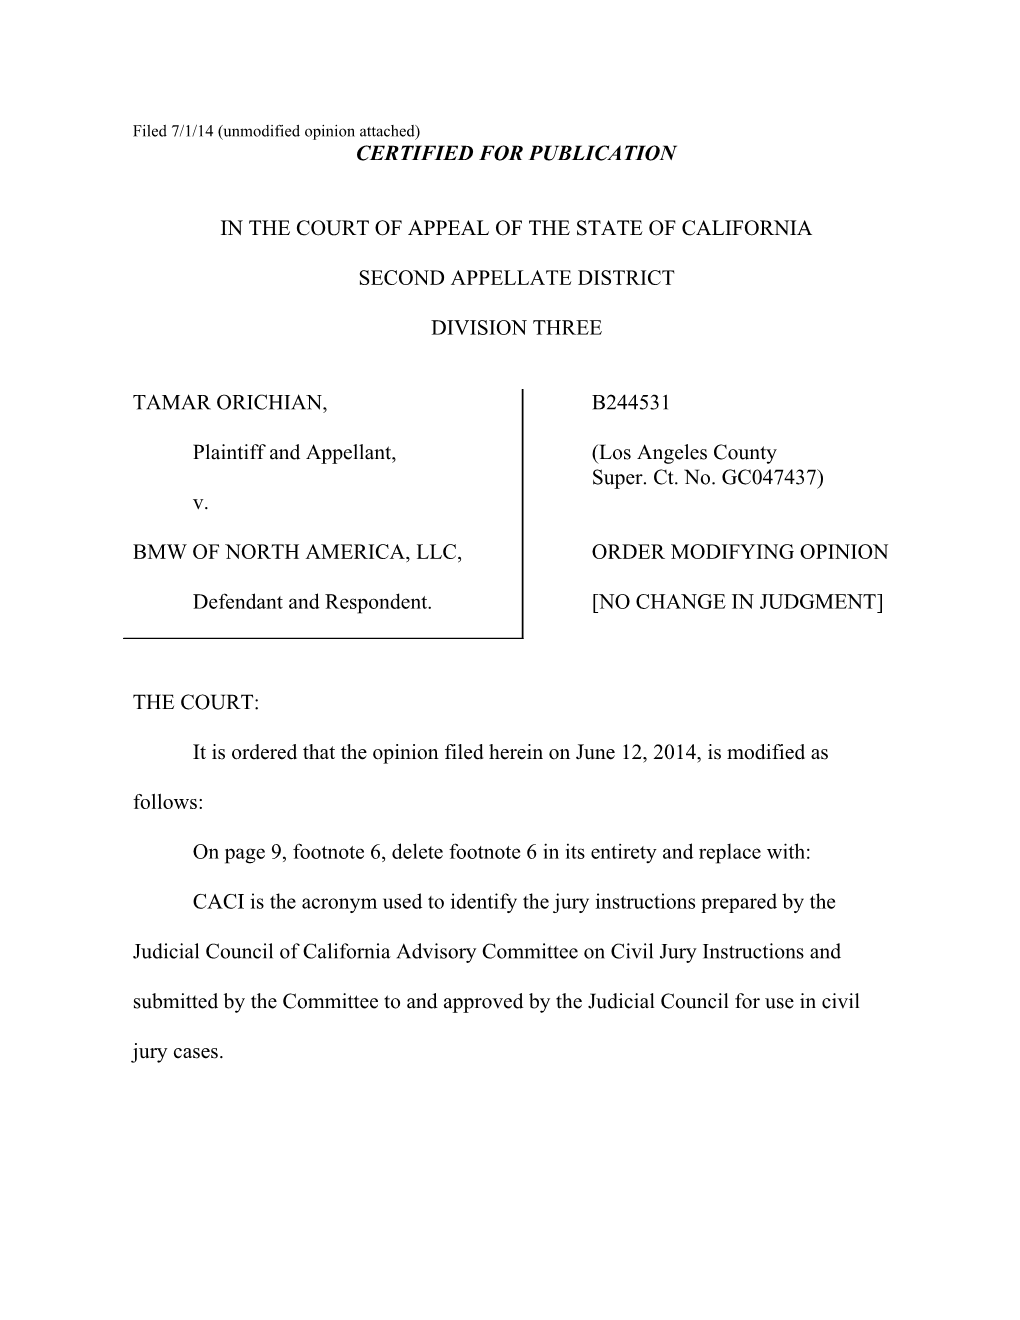 Filed 7/1/14 (Unmodified Opinion Attached)